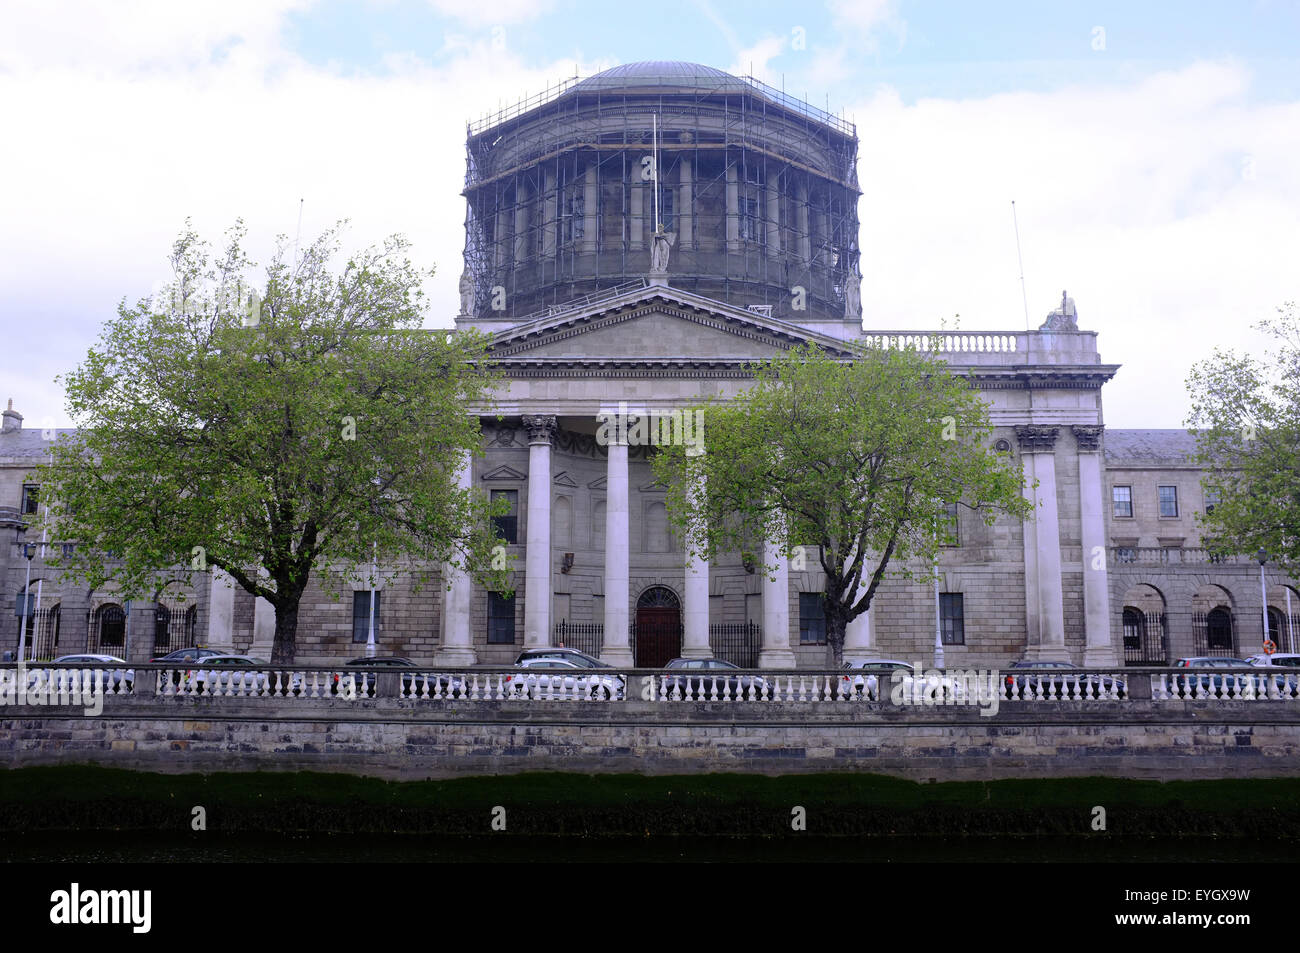 Ireland's main courts building the Four Courts on Inns Quay in Dublin. Stock Photo